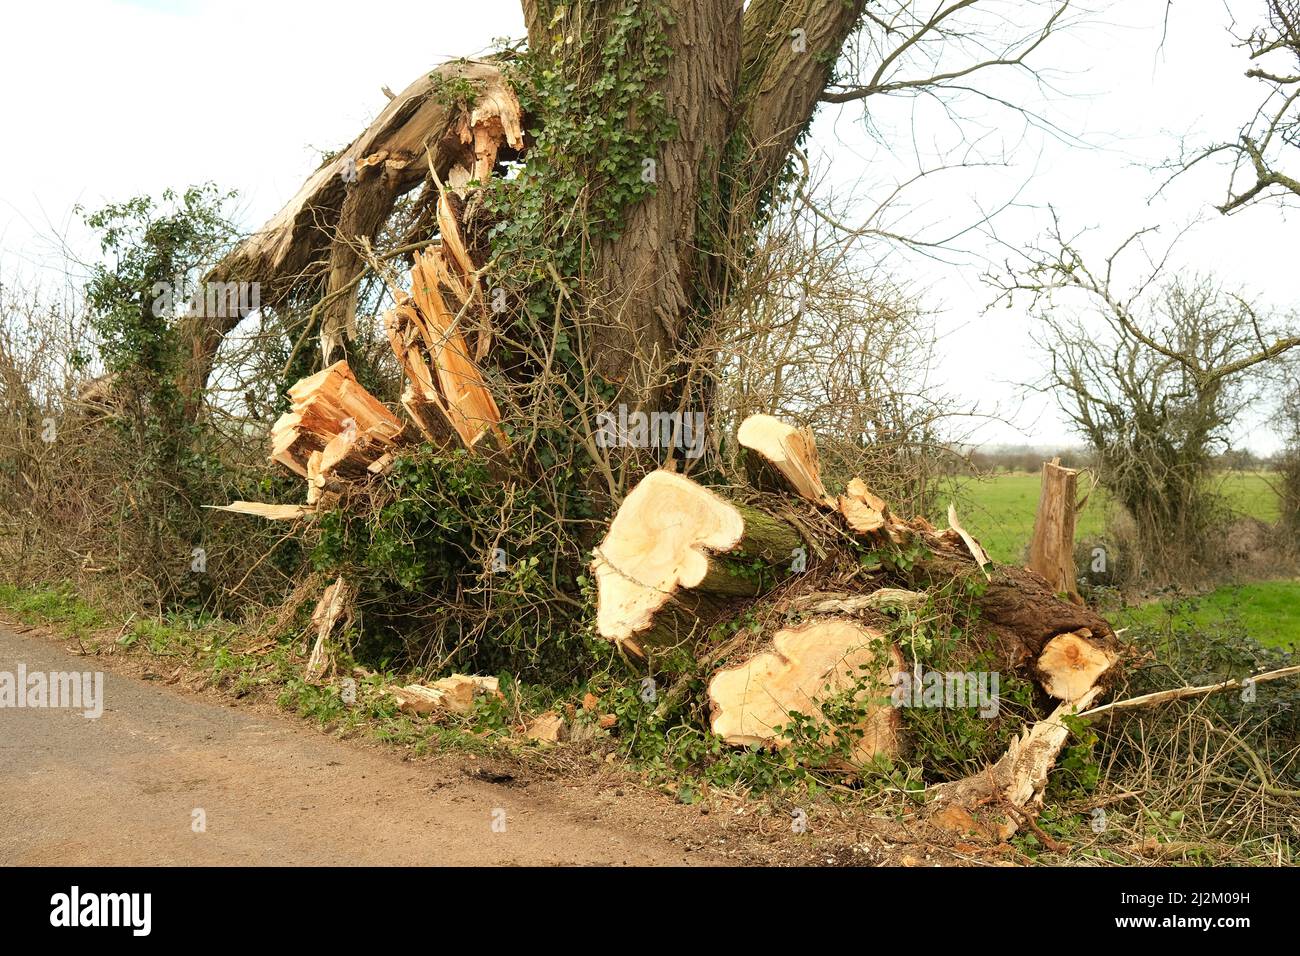 February 2022 - Reaining cut trucks from fallen trees caused by the storms of winter  / Spring 2022 - A sign of our evolving climate. Stock Photo